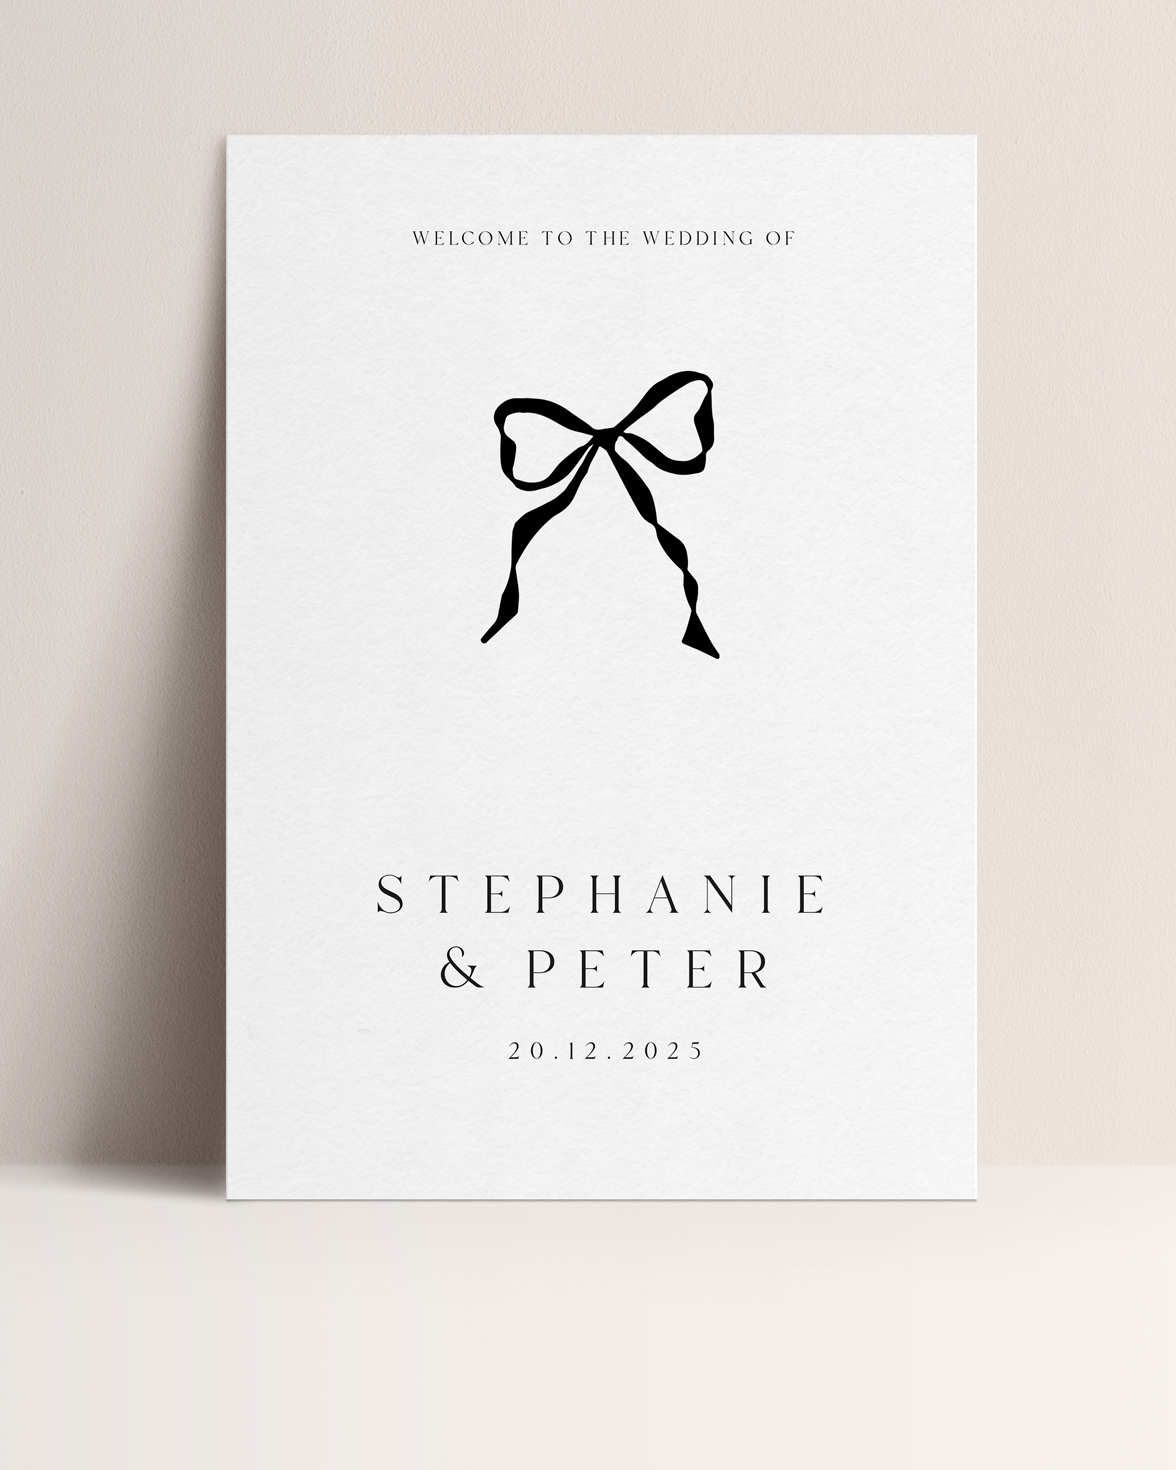 Black and white wedding welcome sign with black handdrawn bow